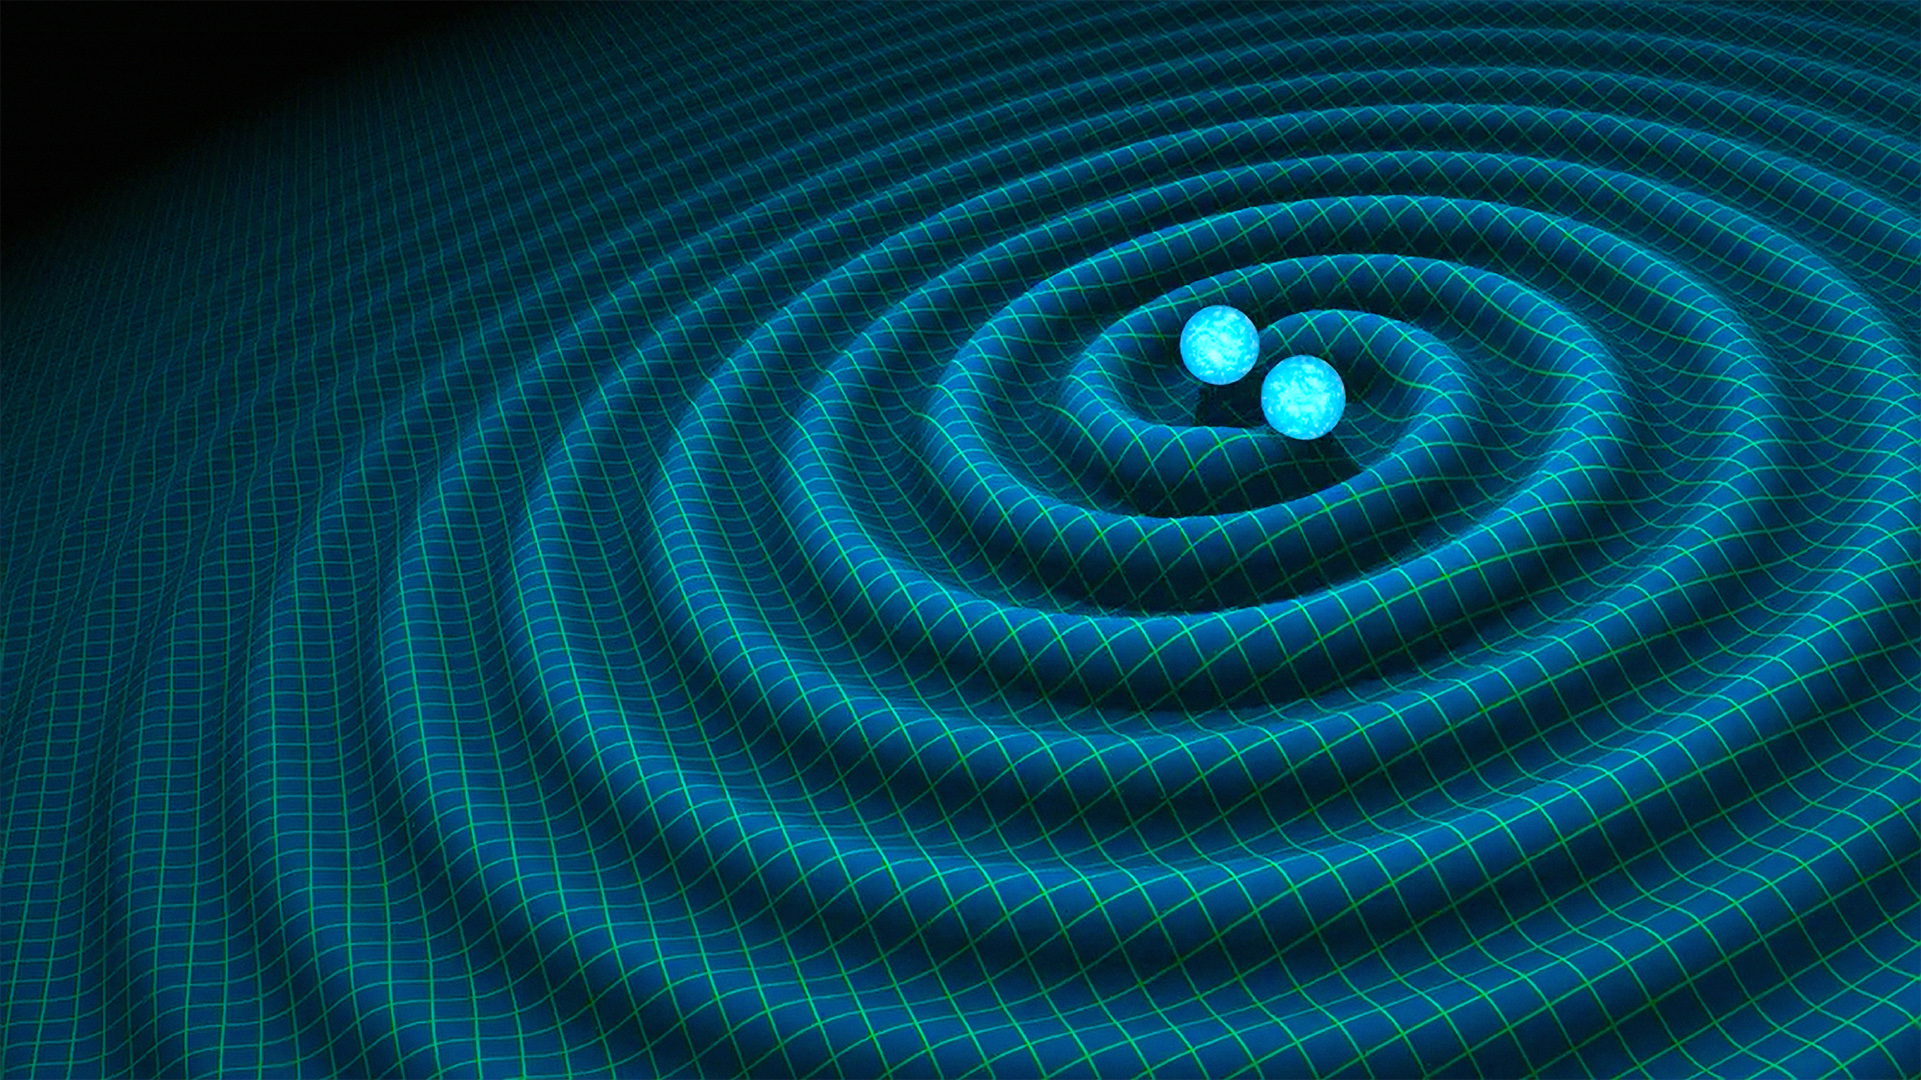 With New Gravitational-Wave Detectors, More Cosmic Mysteries Will Be Solved  | Space